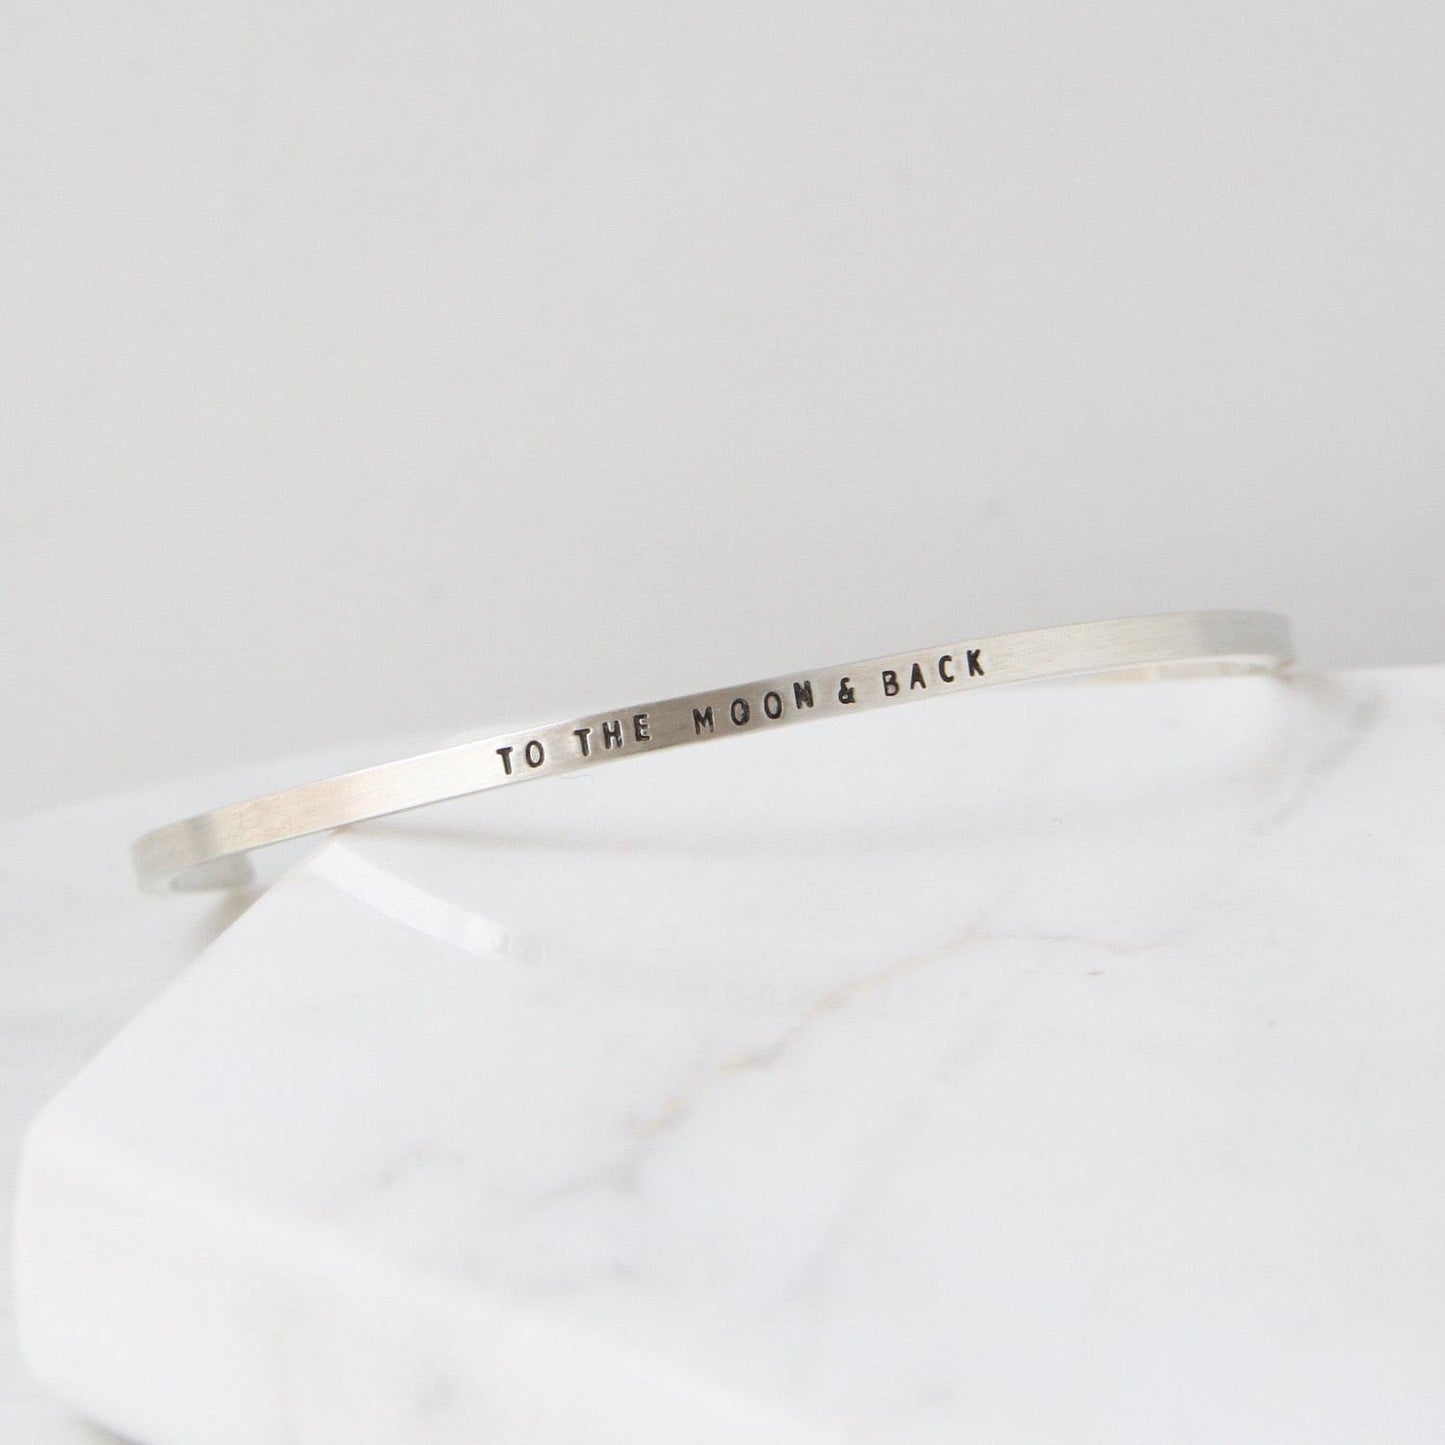 BRC Sterling Silver Cuff - "To The Moon & Back"